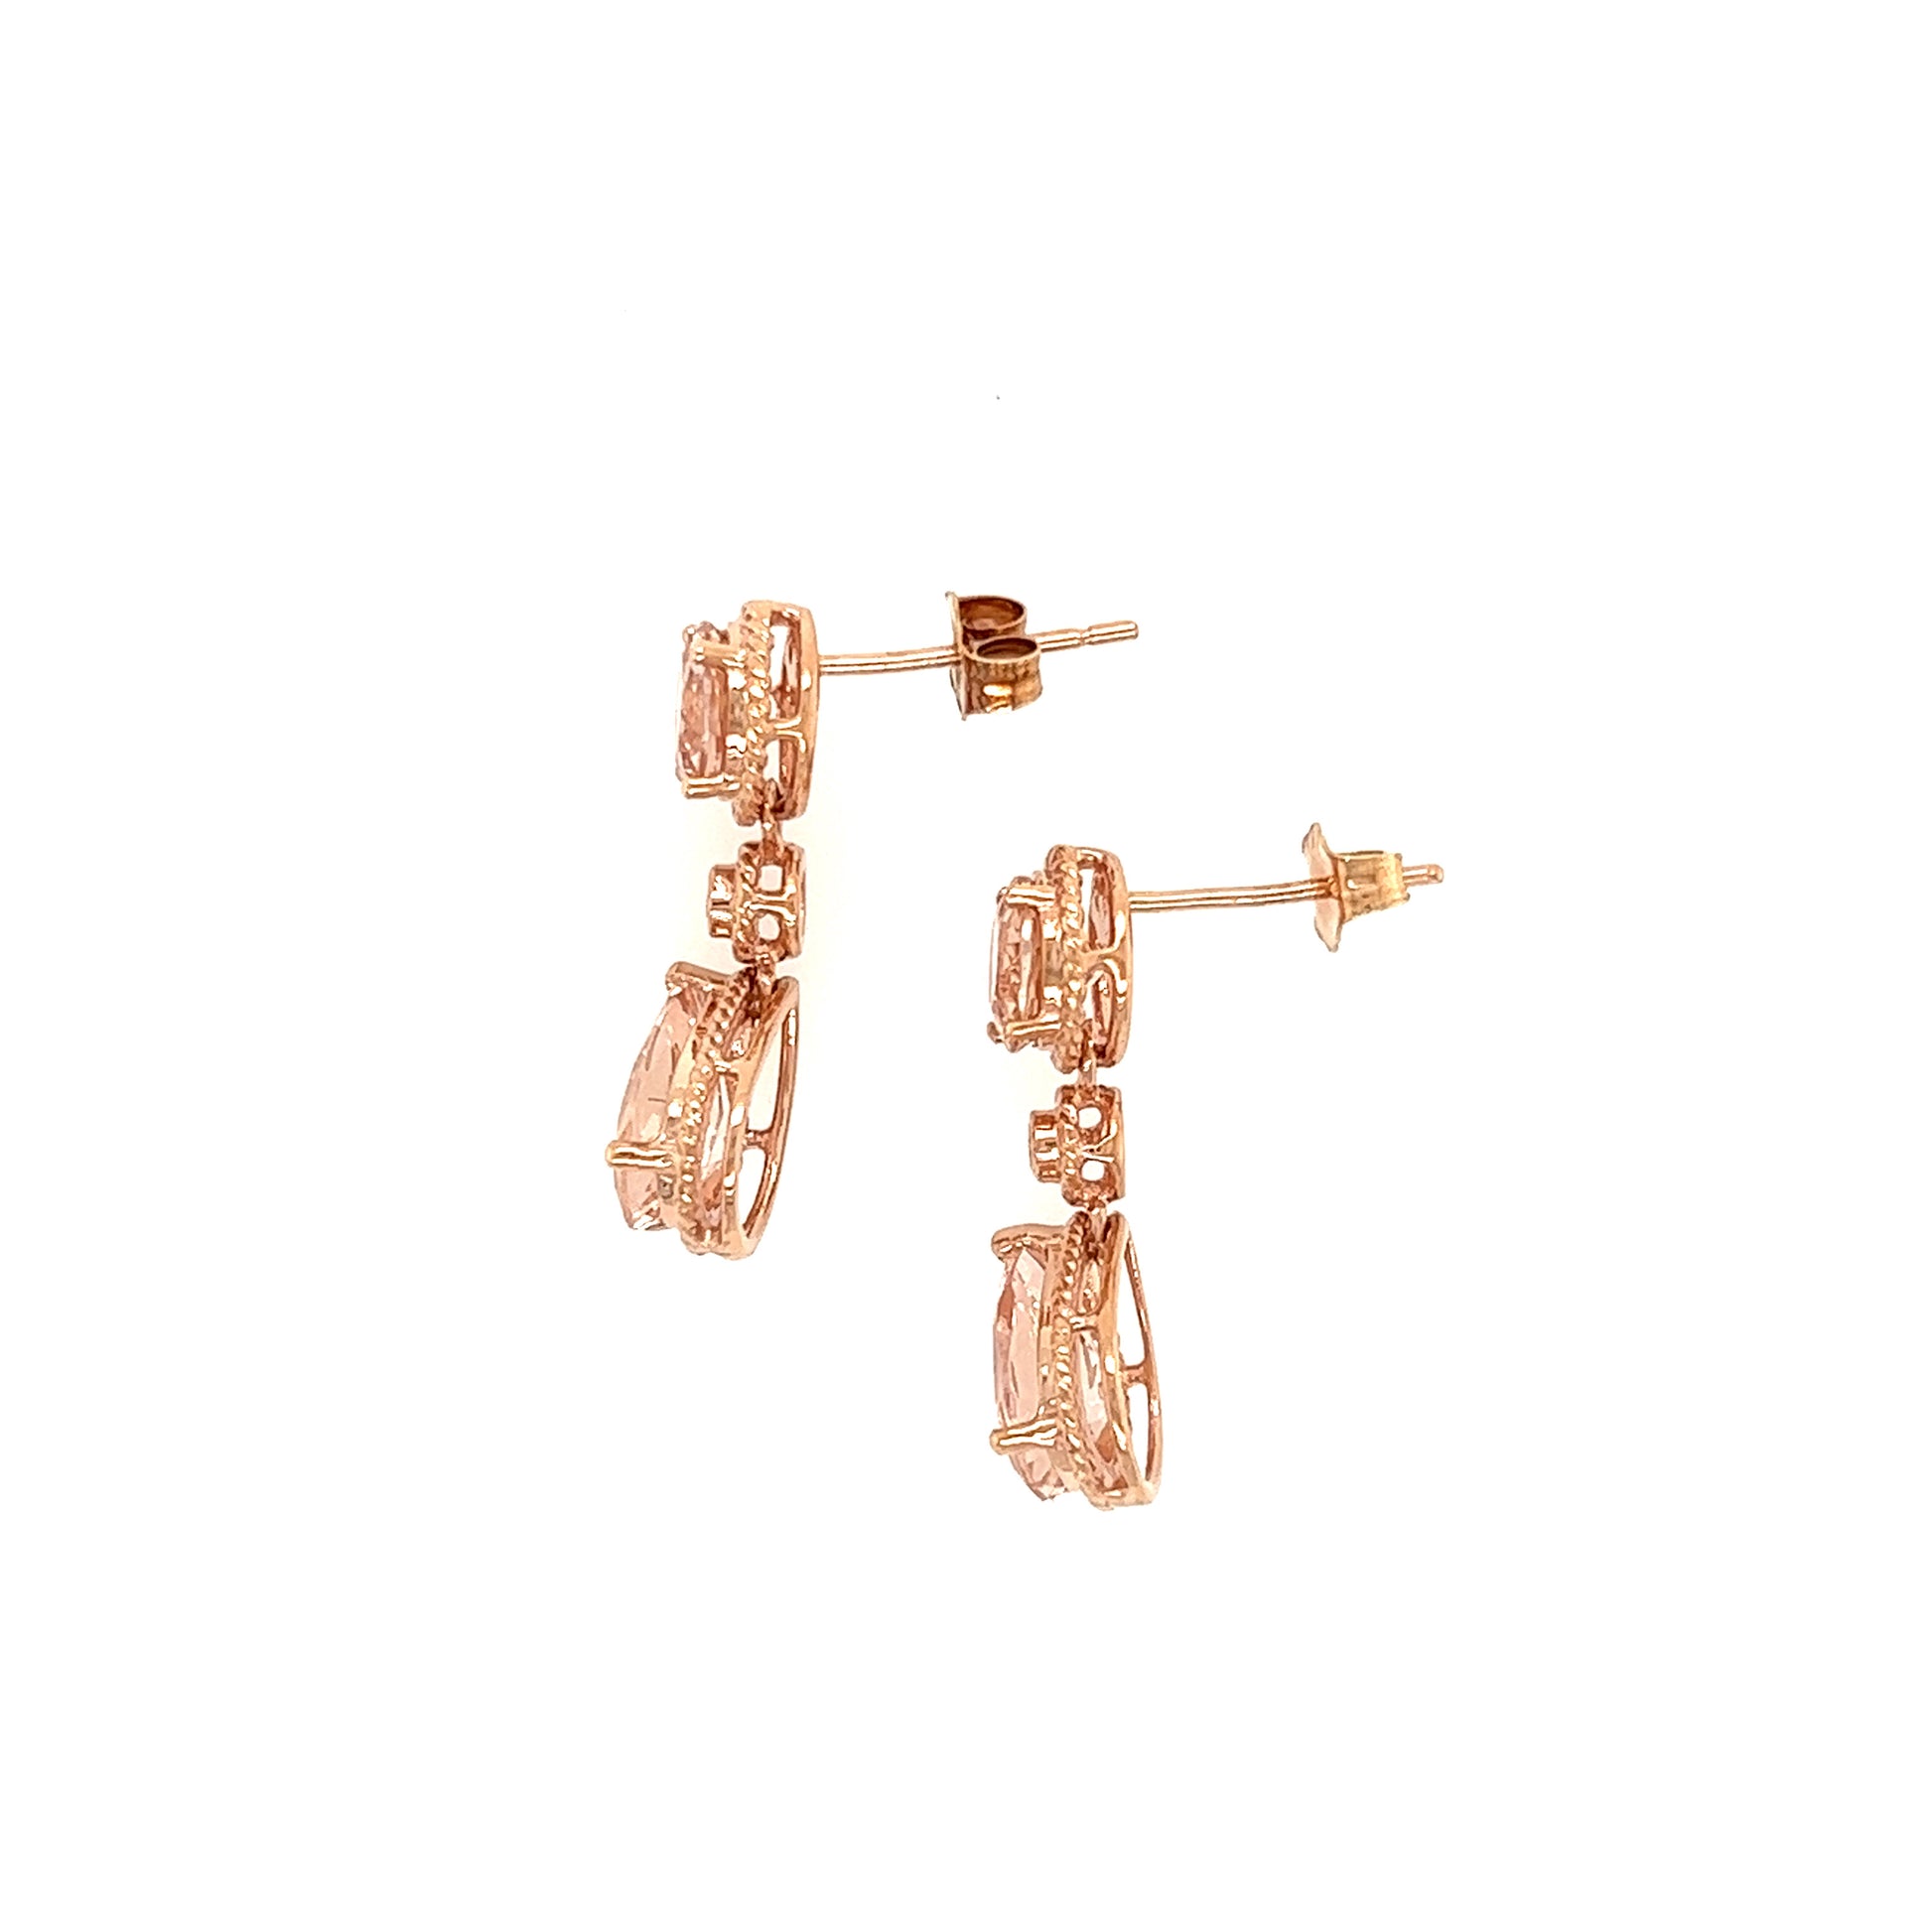 Morganite Dangle Earrings with a Round Bezel Diamond in 14K Rose Gold Top Side View